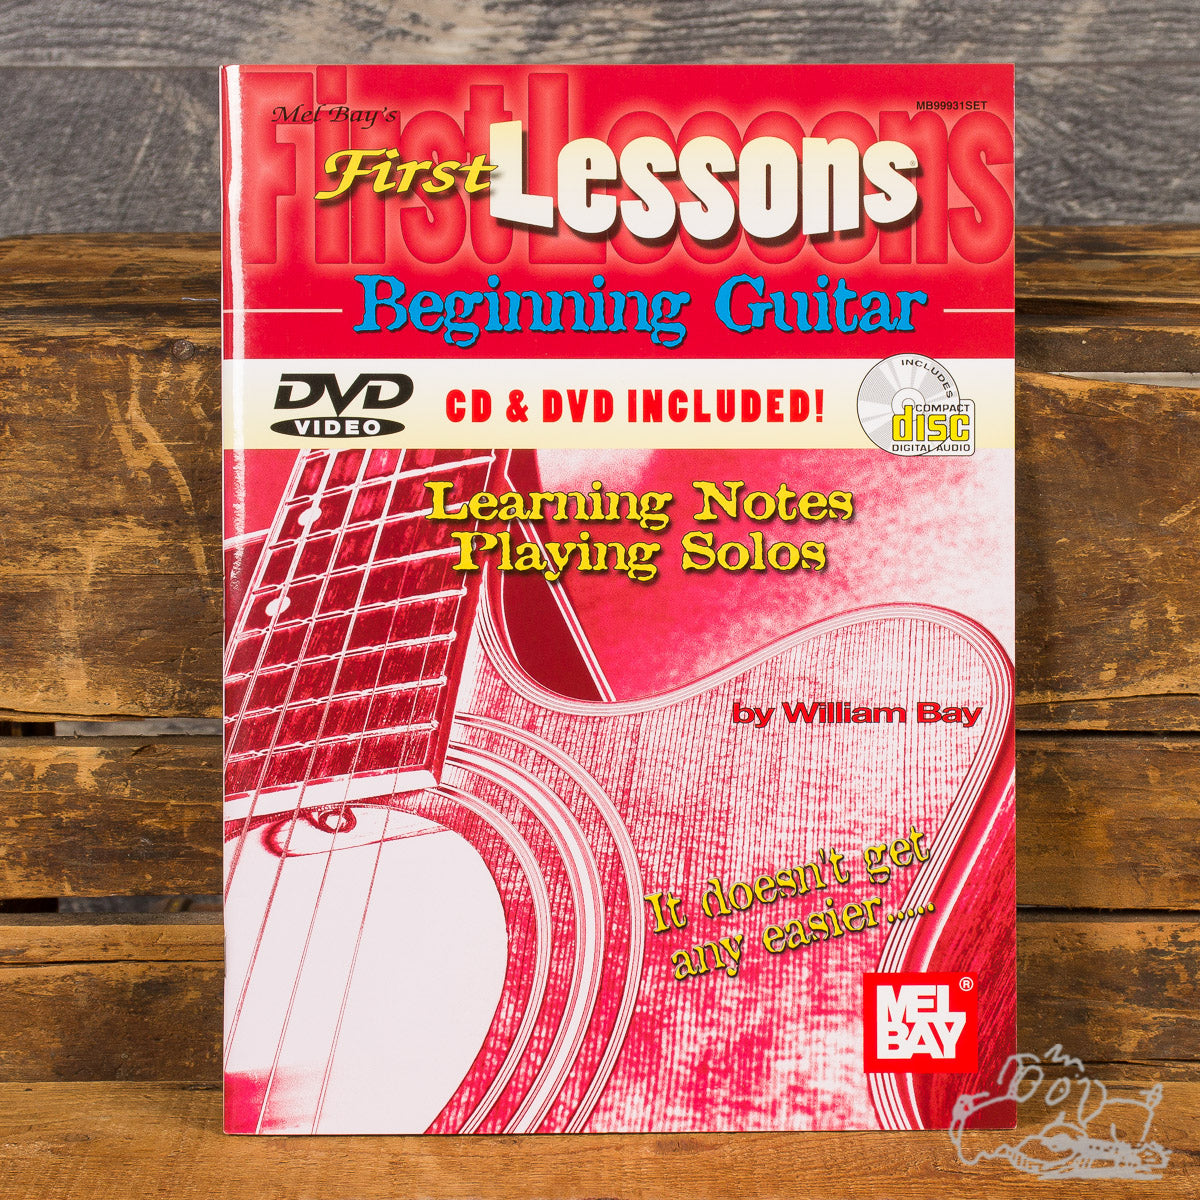 Mel Bay's First Lessons Beginning Guitar by William Bay - CD & DVD Included!